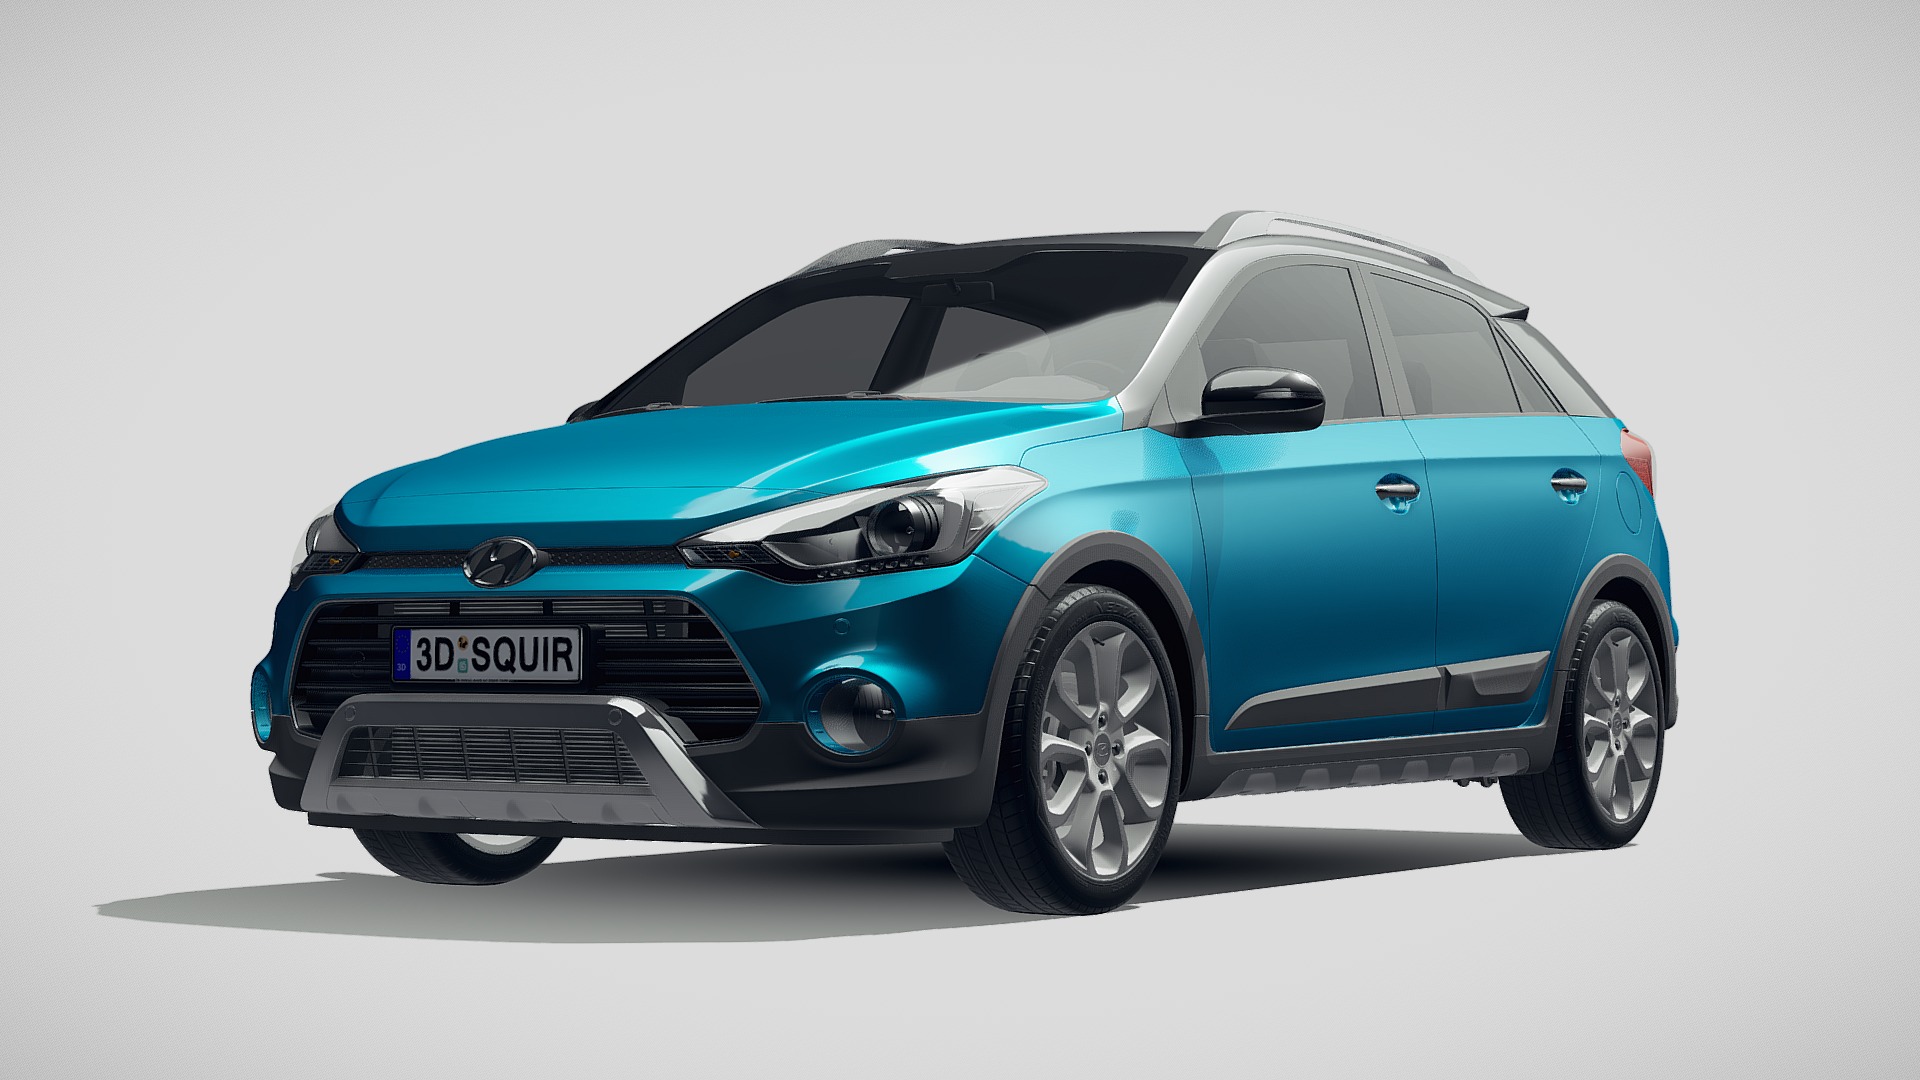 3D model Hyundai i20 Actilve 2019 - This is a 3D model of the Hyundai i20 Actilve 2019. The 3D model is about a blue car with a white background.